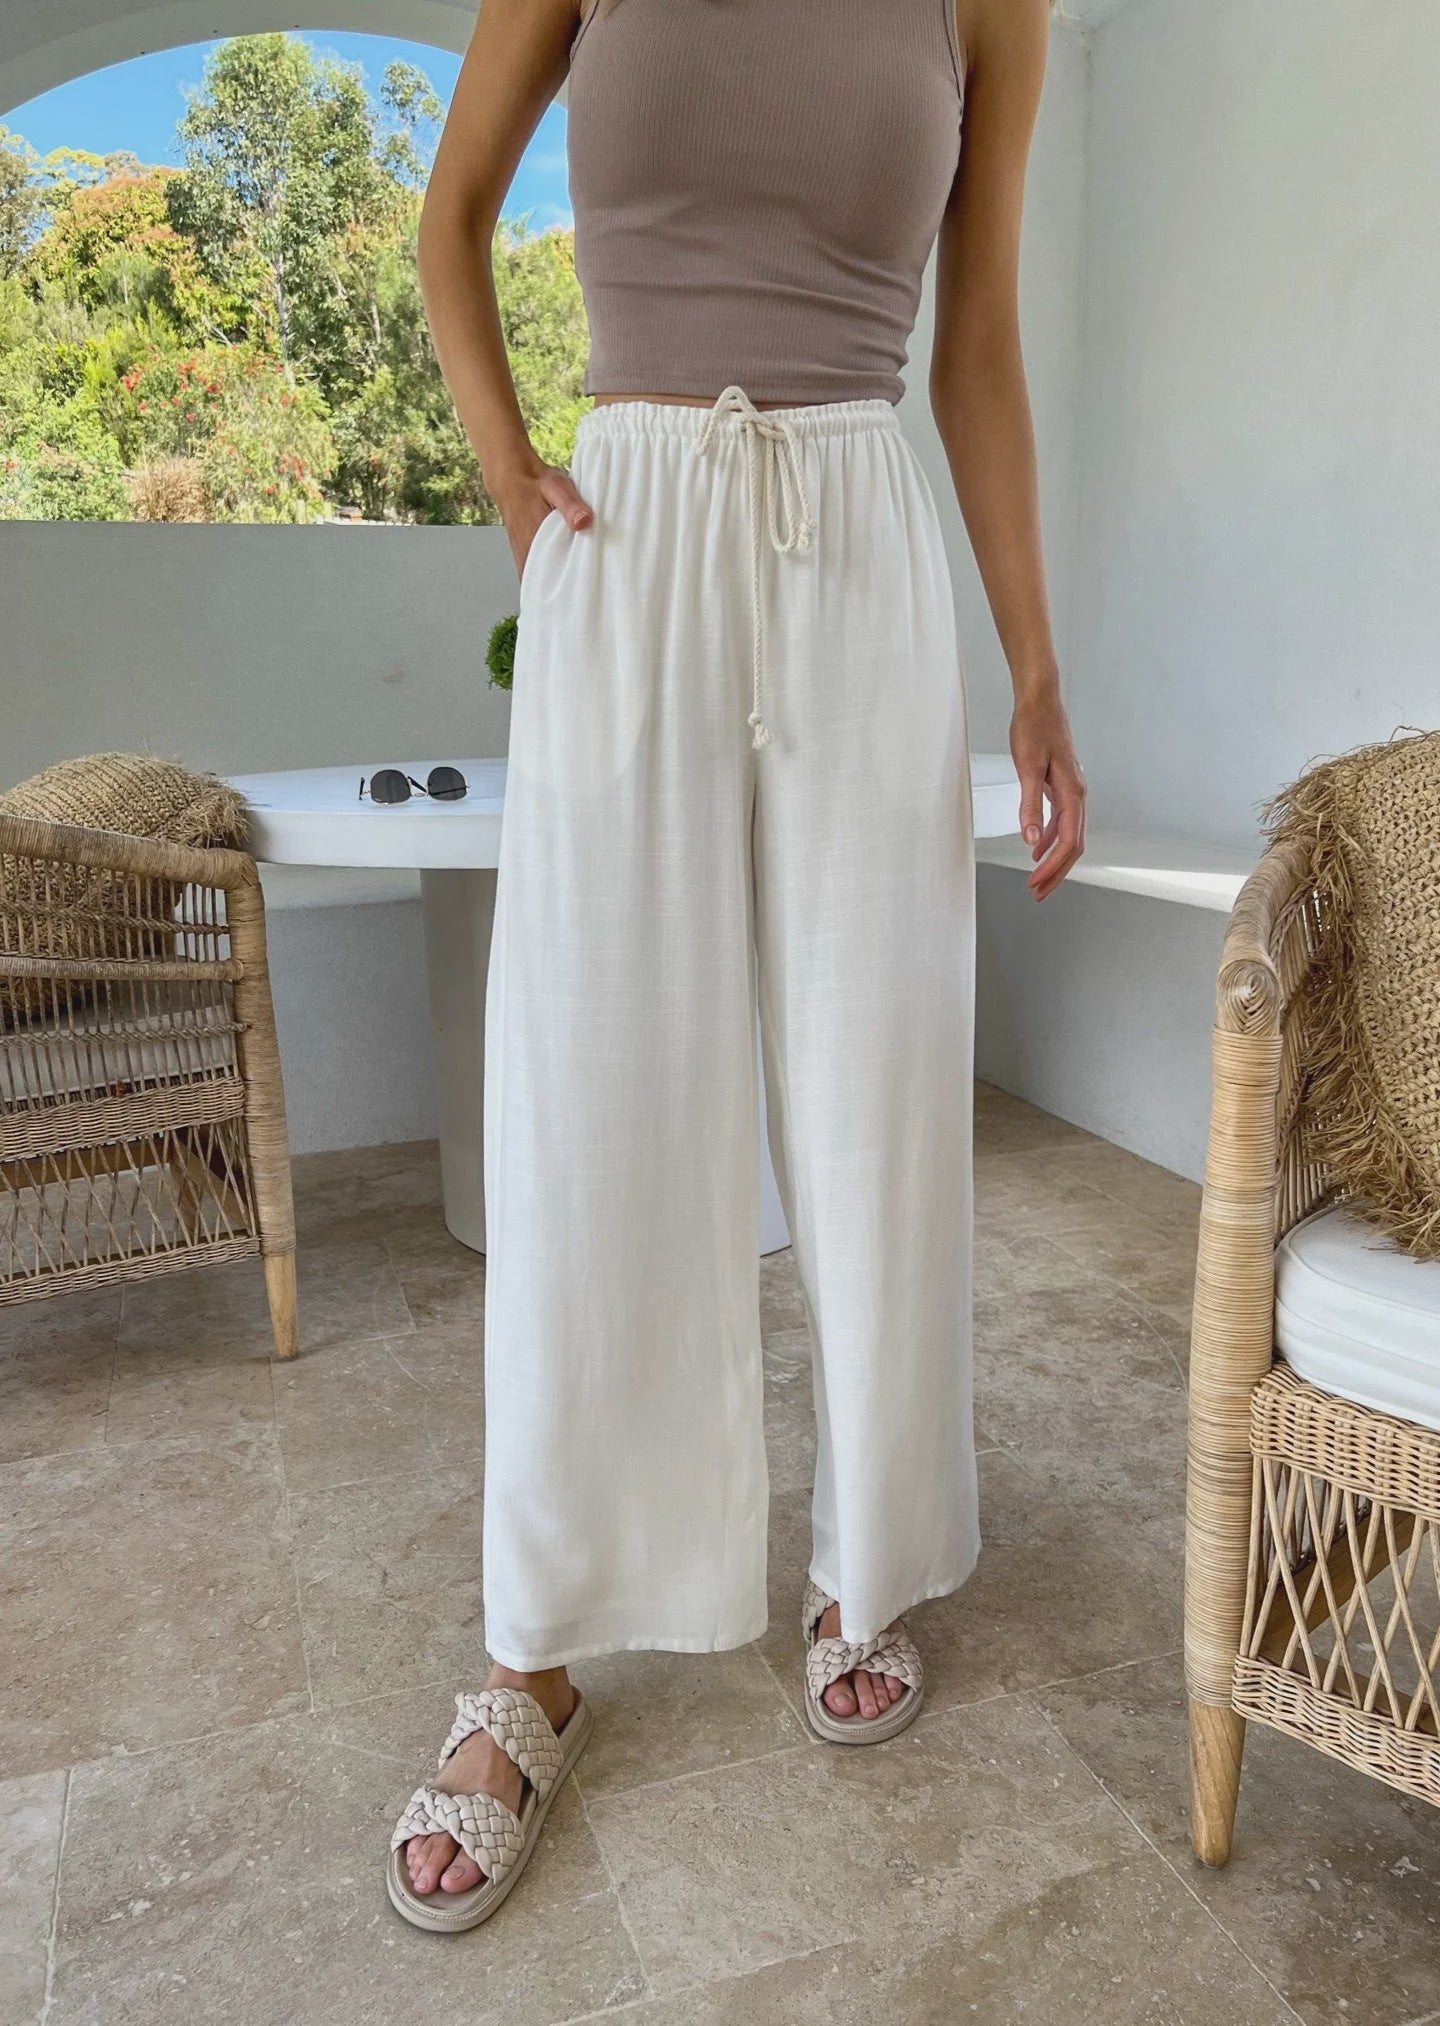 These breezy linen pants will be your go-to for any casual day out. With their comfortable elasticated and drawstring waist, you'll never have to worry about a snug fit. Plus, the added pockets make them both stylish and practical. Perfect for any laid-back look!